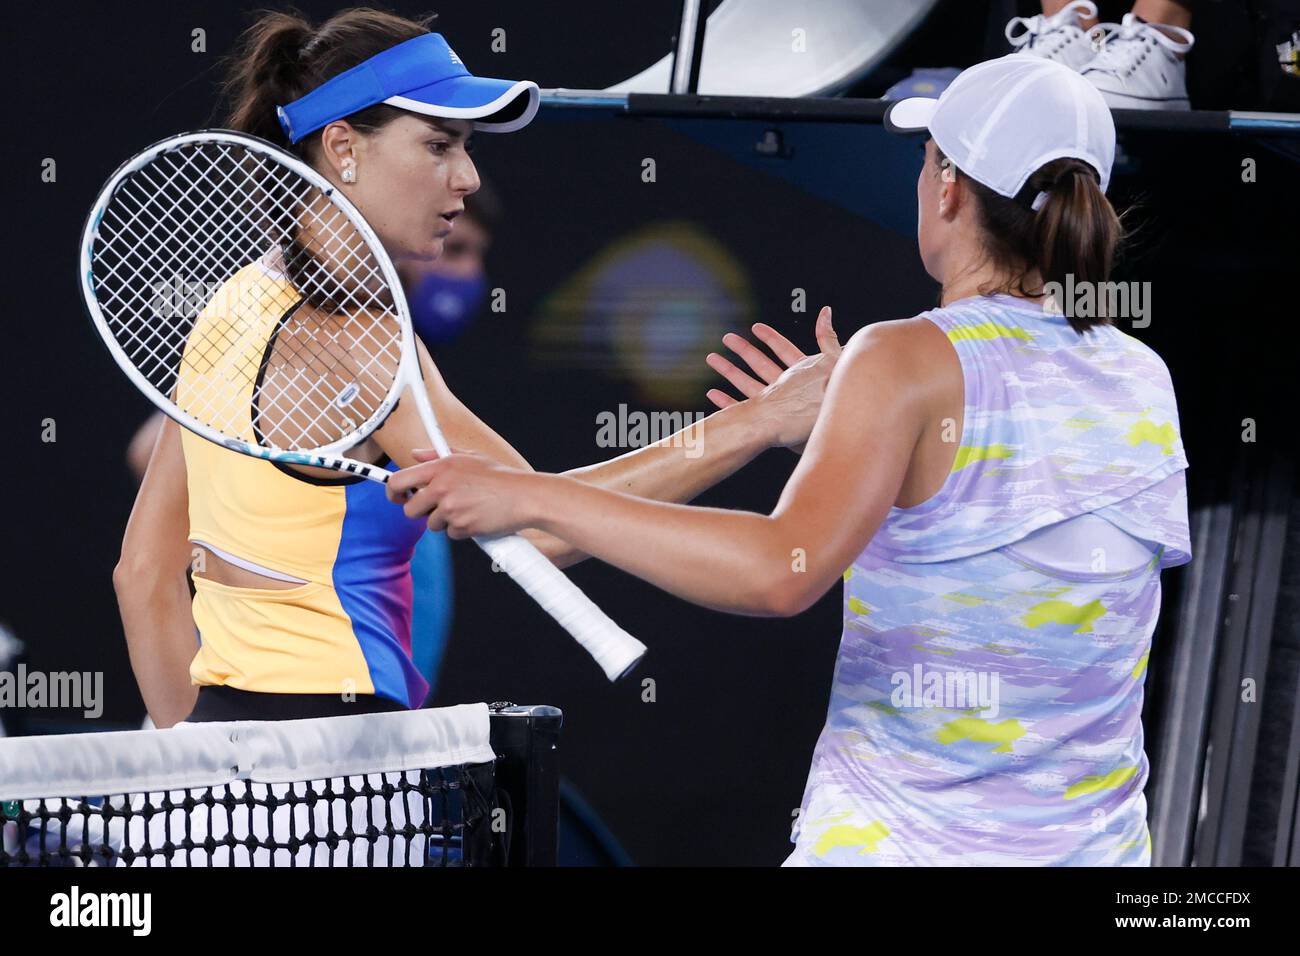 Iga Swiatek, right, of Poland is congratulated by Sorana Cirstea of Romania following their fourth round match at the Australian Open tennis championships in Melbourne, Australia, Monday, Jan